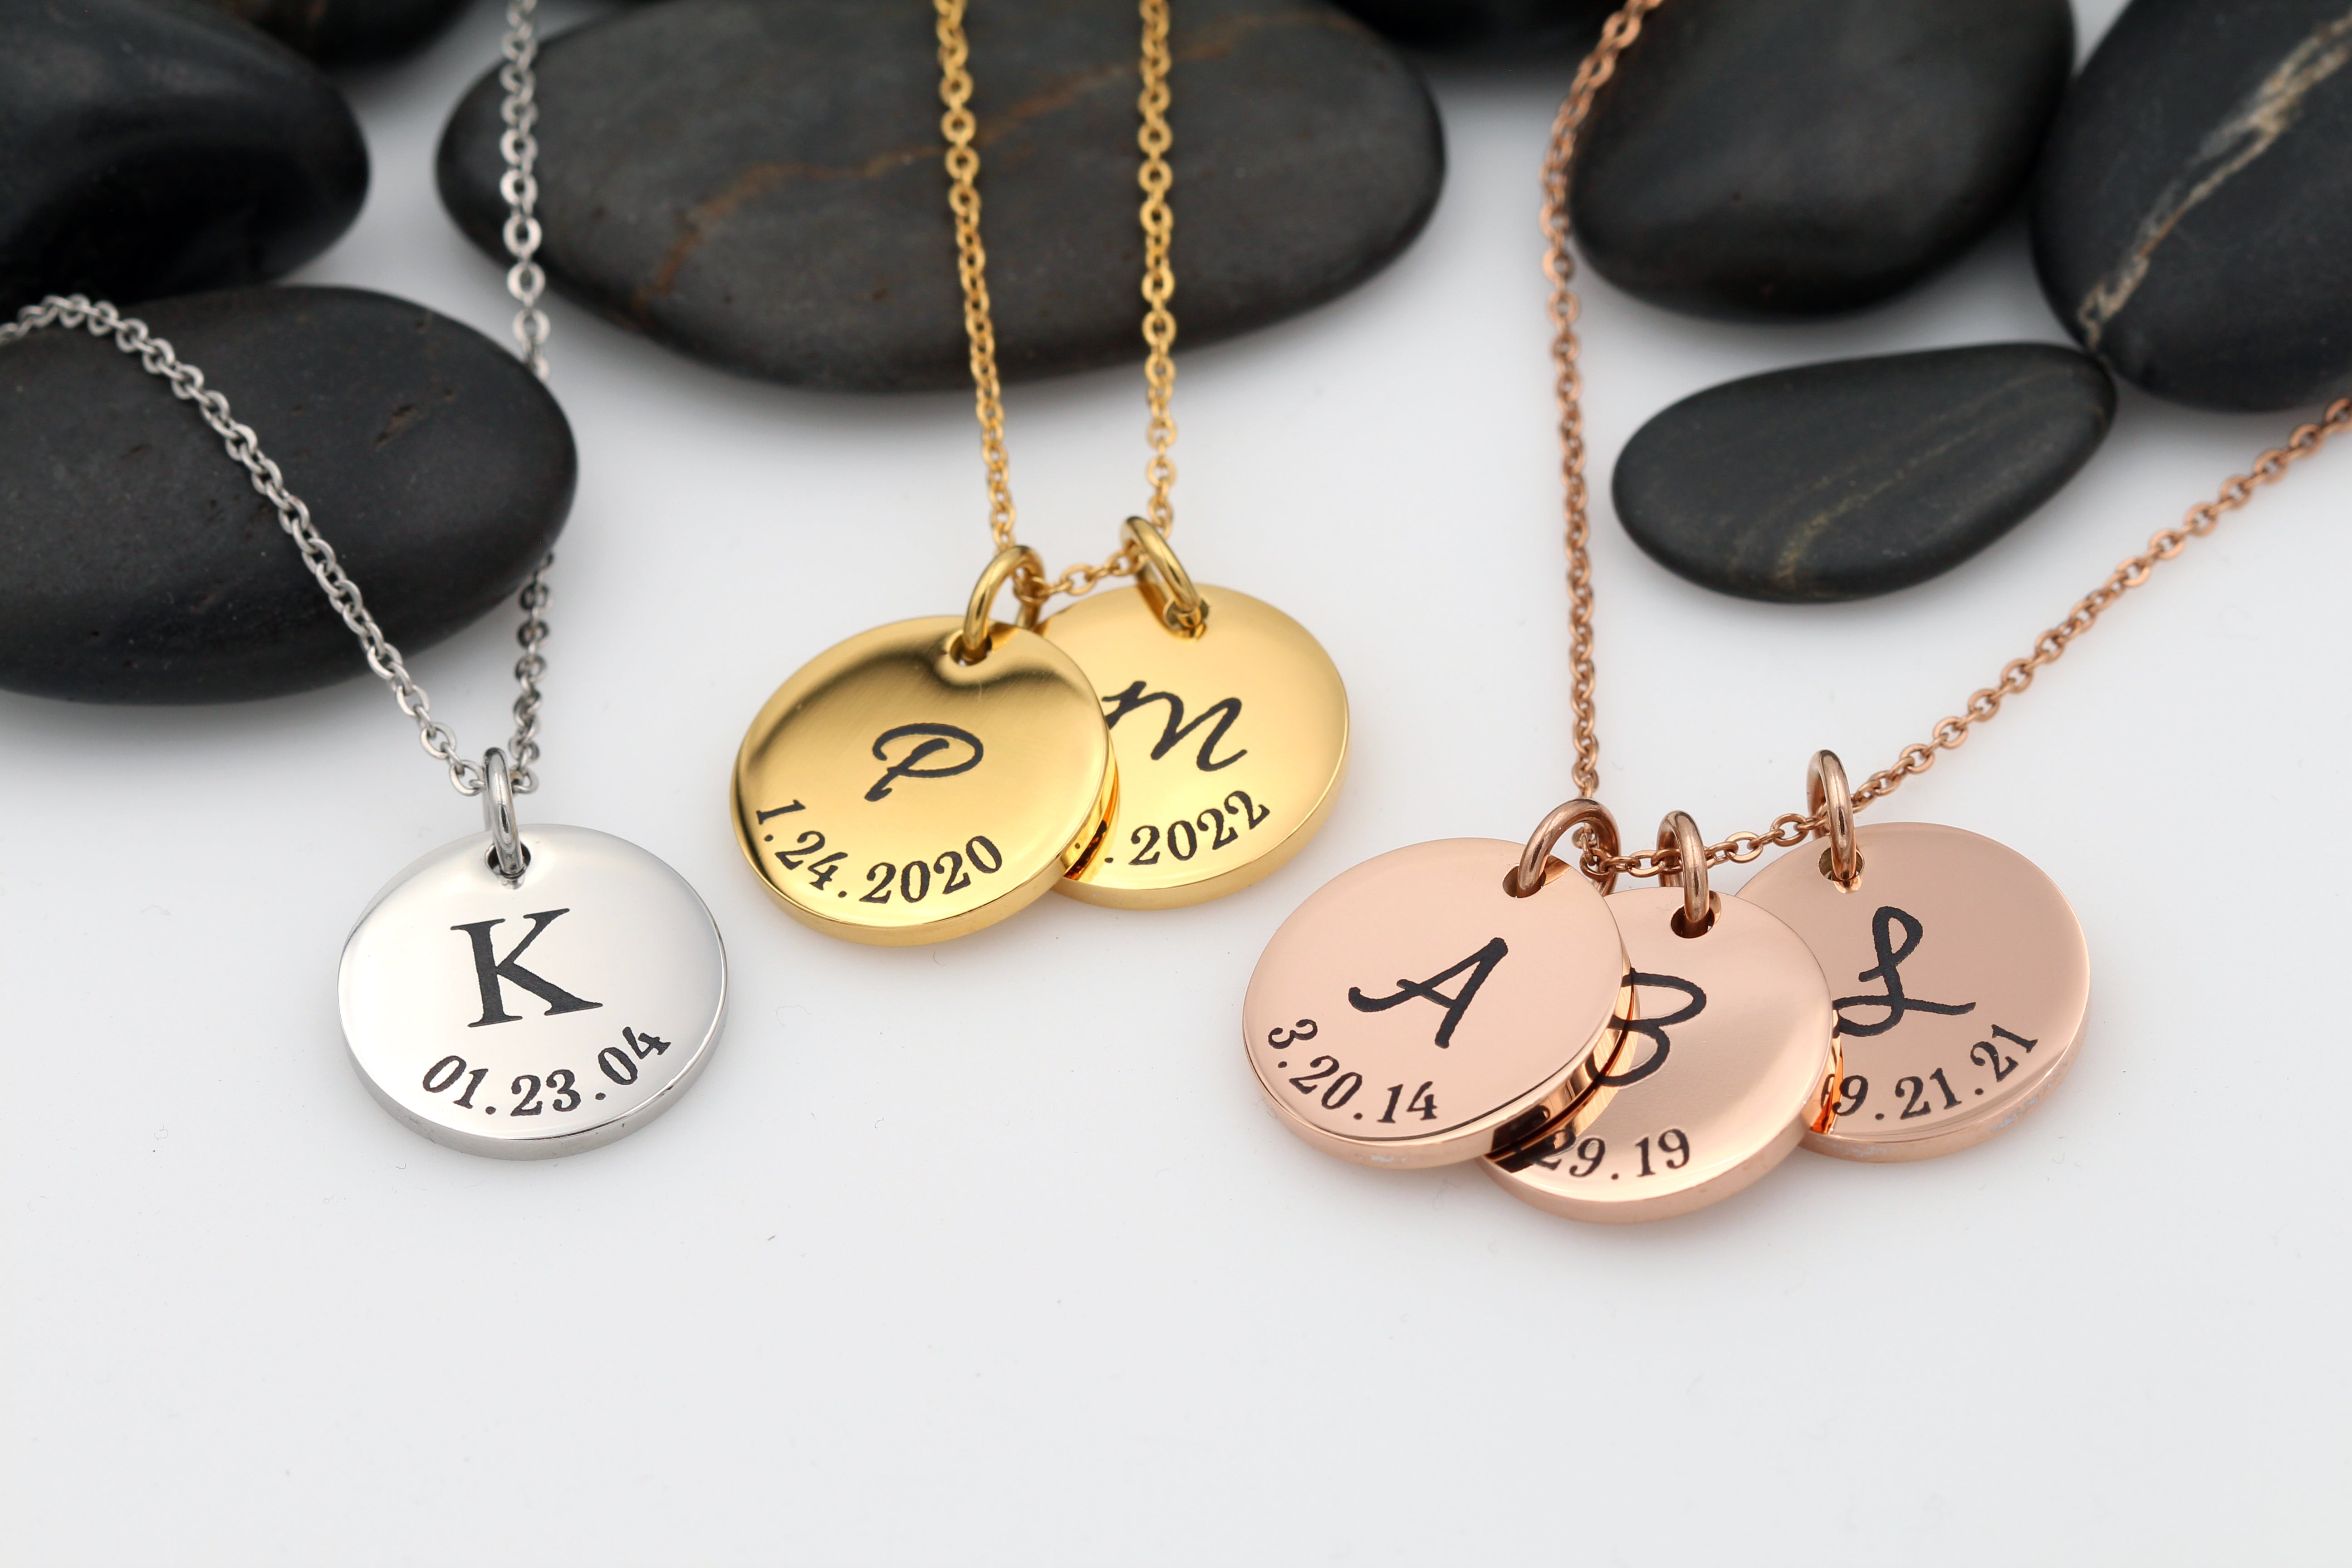 Engraved Initial Necklace - Personalized Engraved Date Necklace